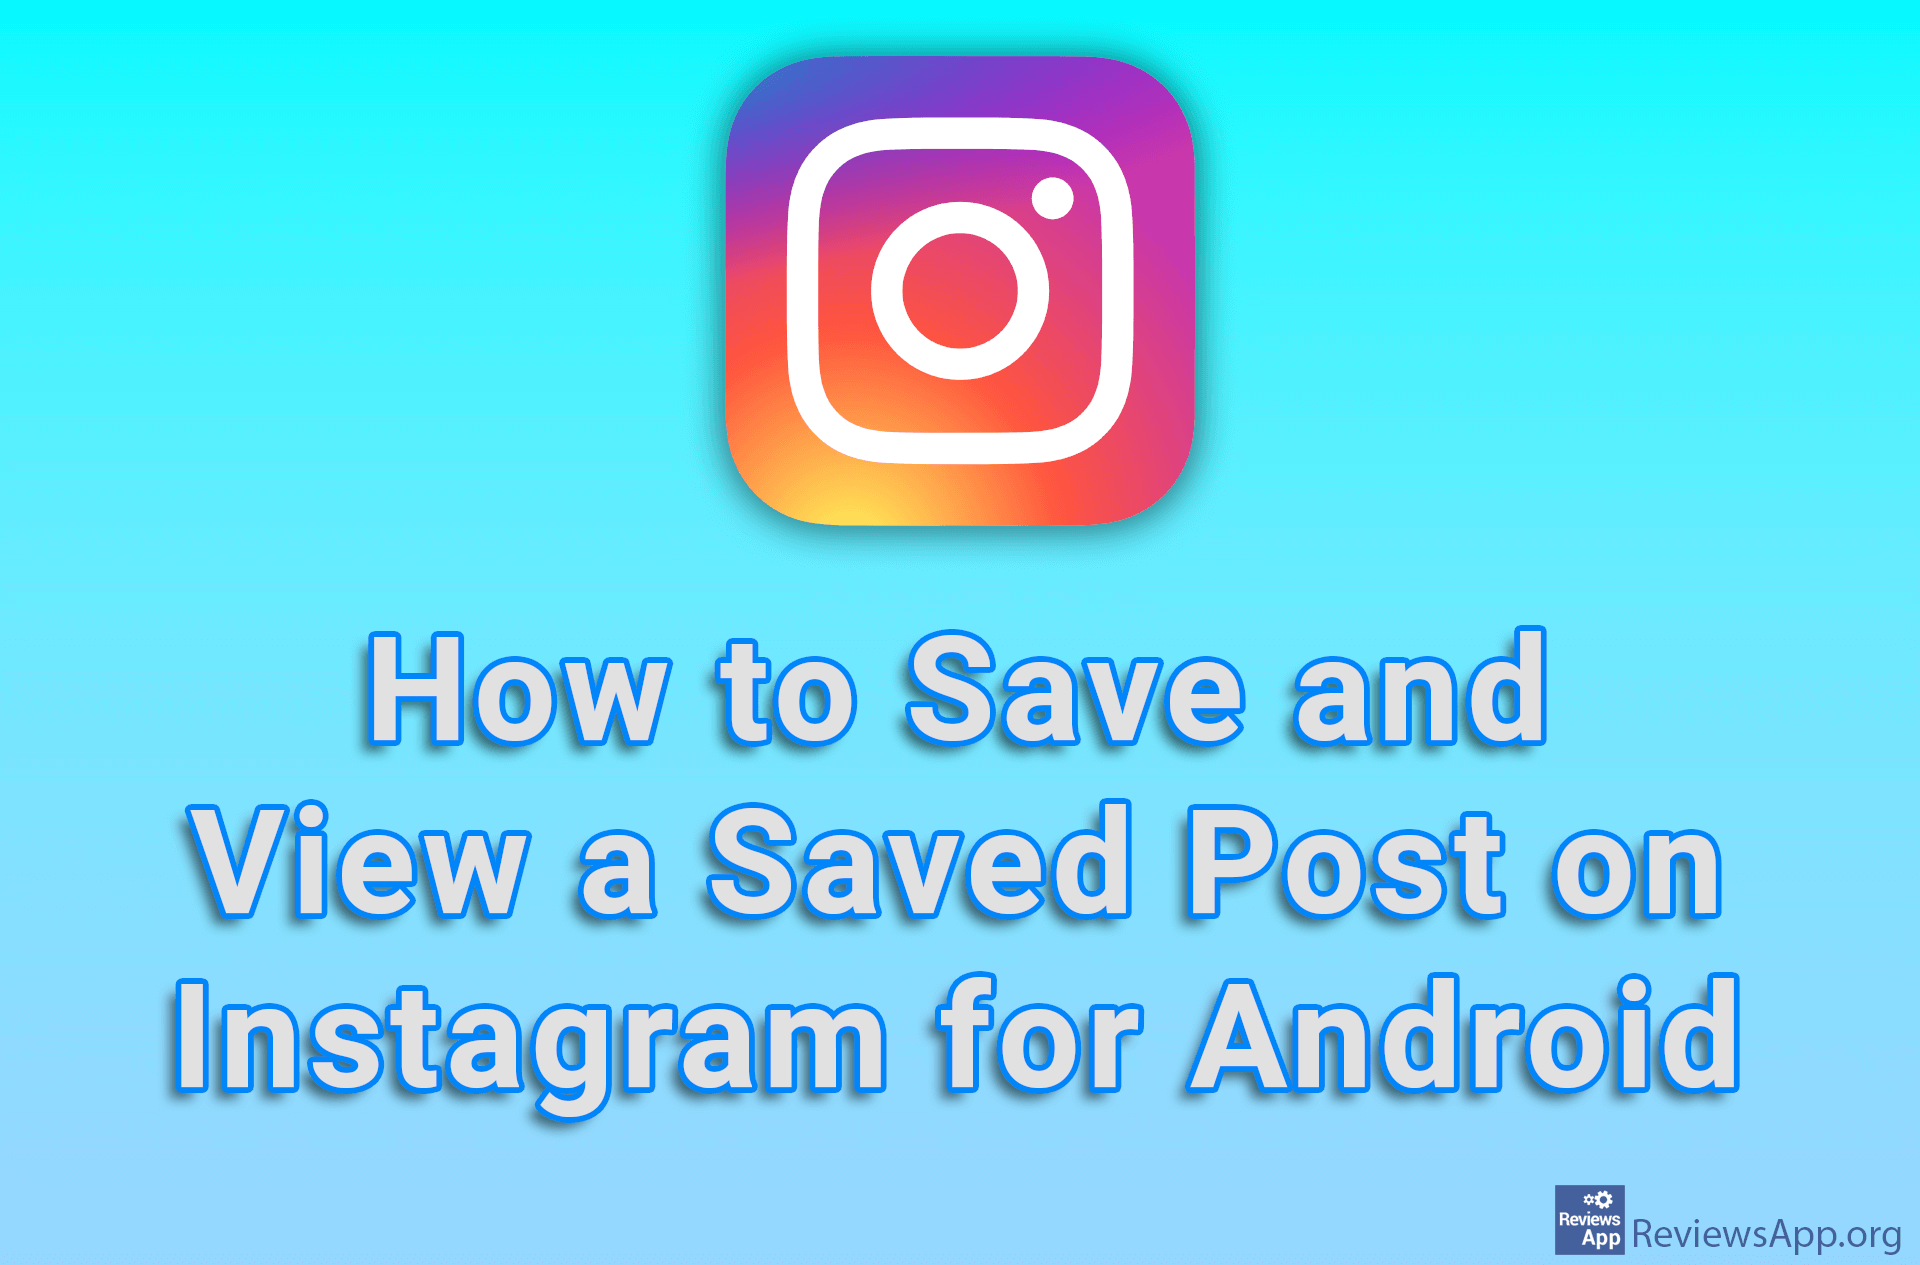 How to Save and View a Saved Post on Instagram for Android